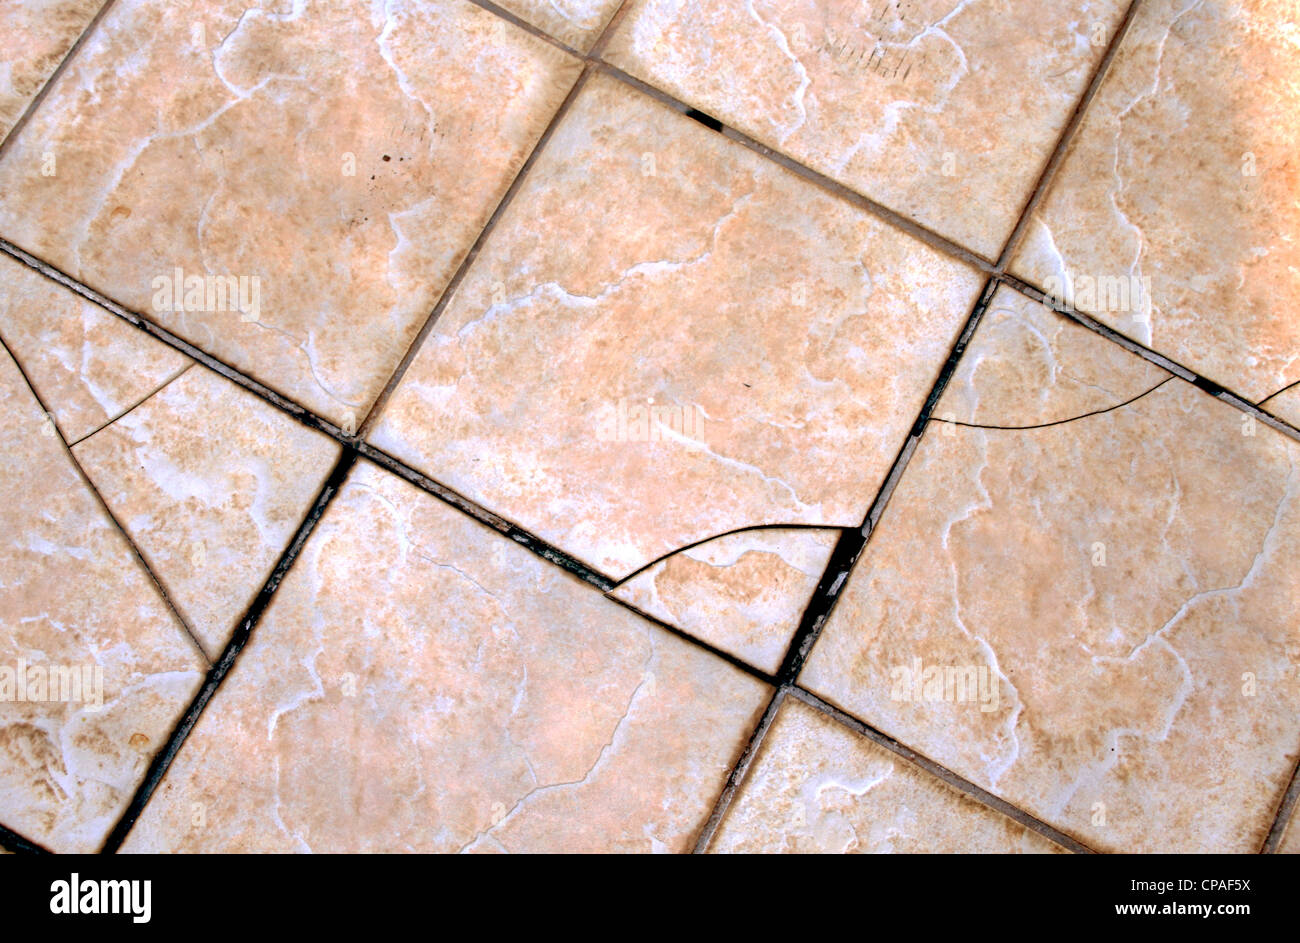 Cracked Floor Tiles High Resolution Stock Photography And Images Alamy